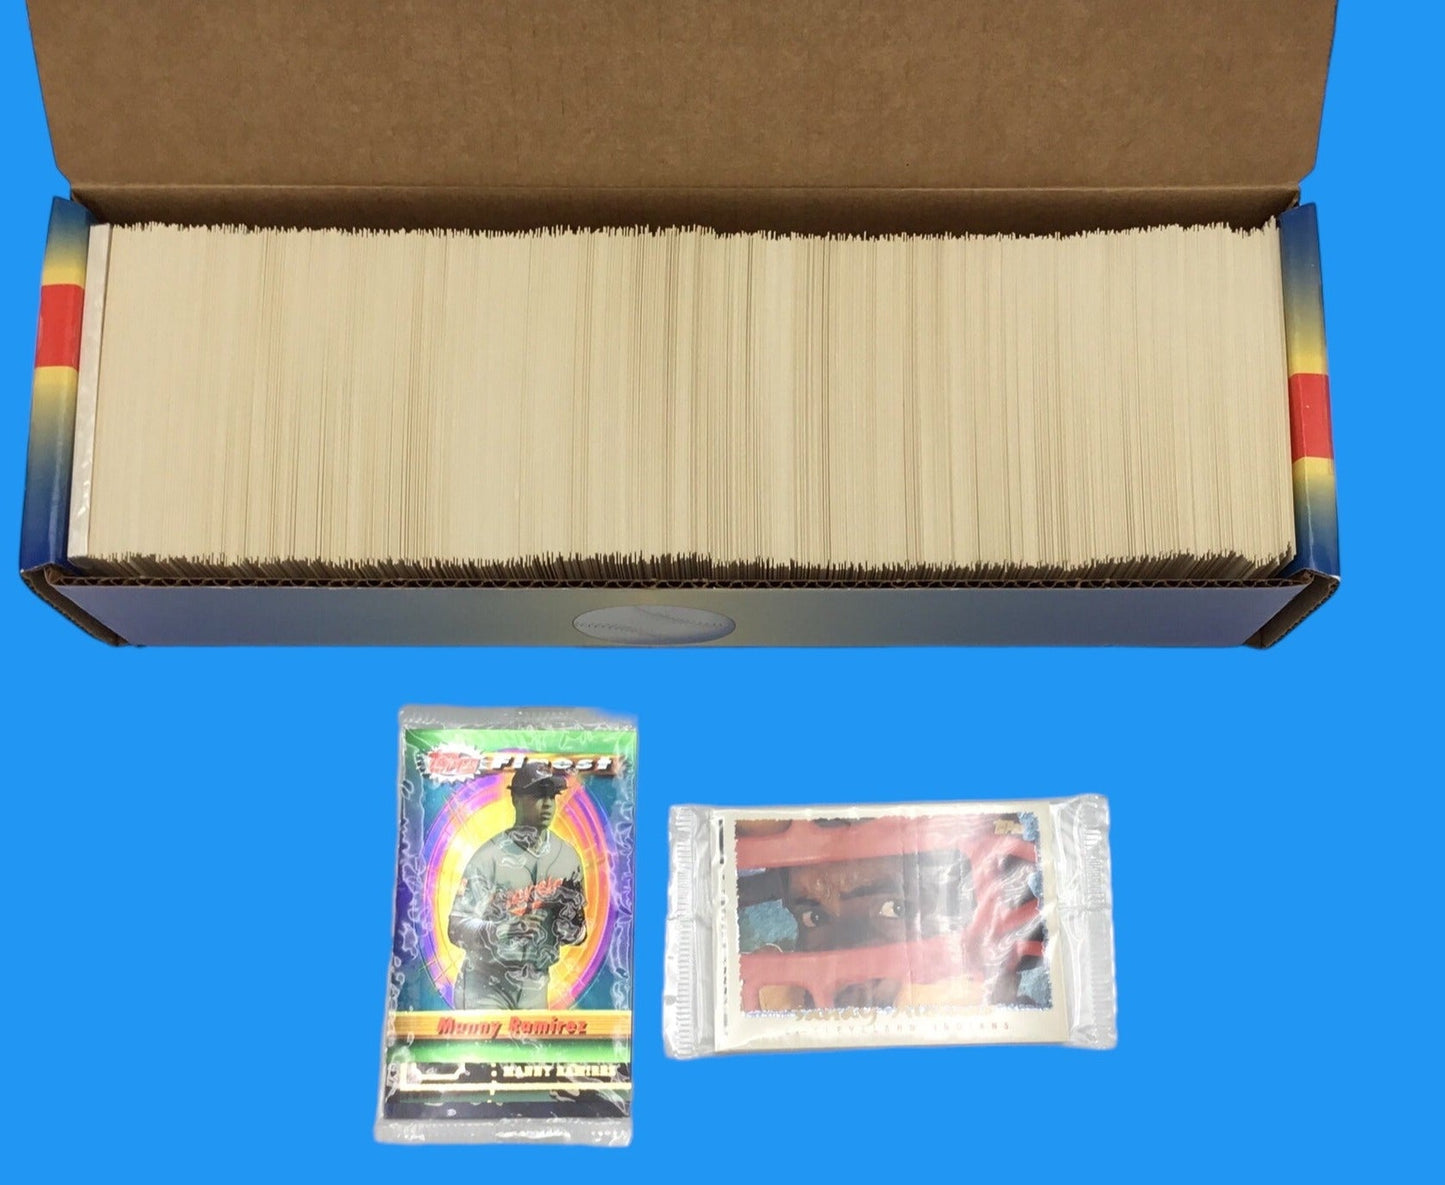 1994 Topps Baseball Complete Set of Series 1 & 2 with Special Inserts Open